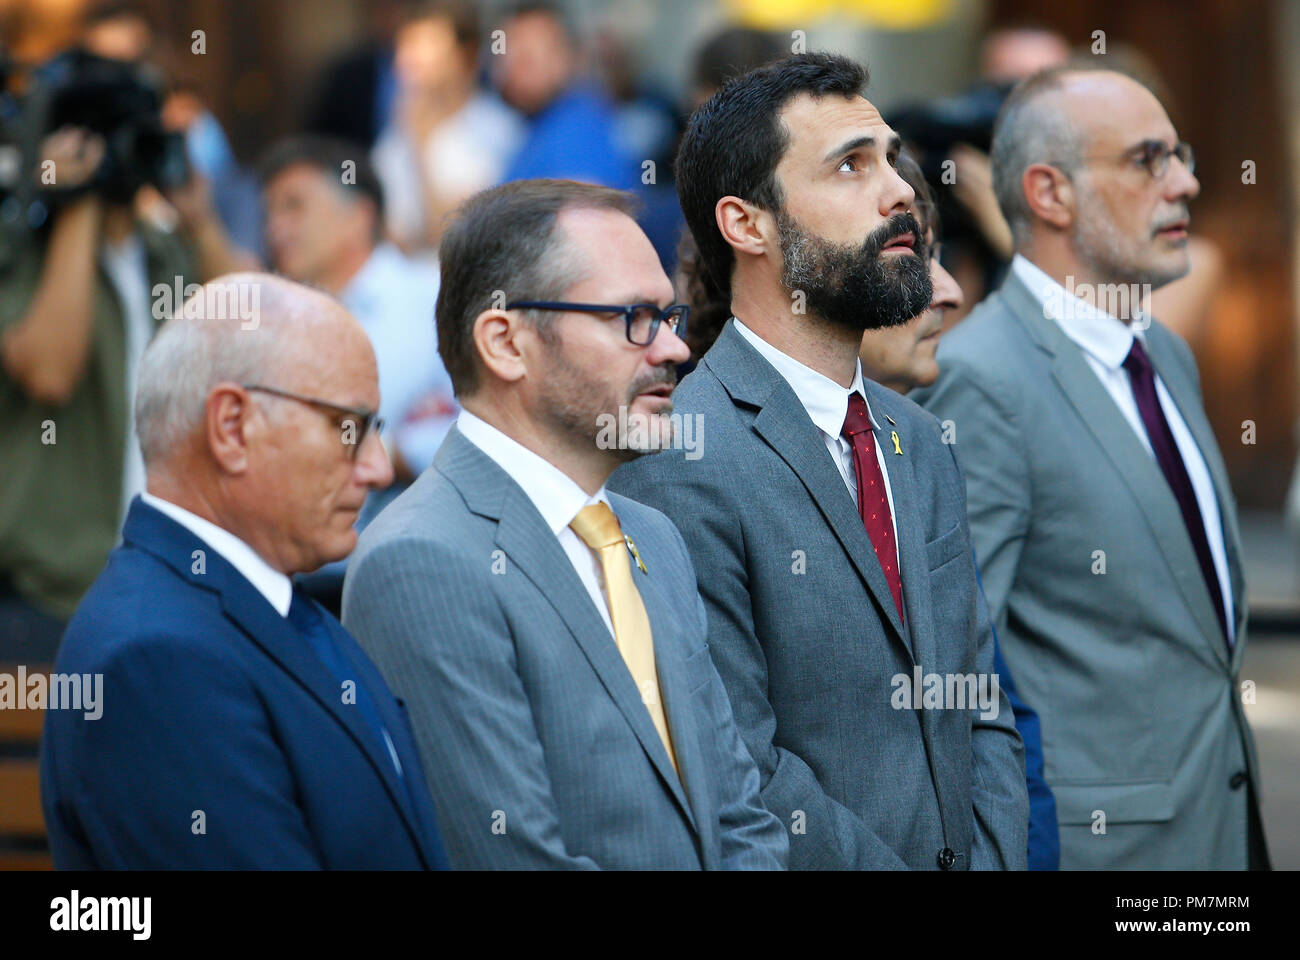 Roger Torrent, President of Catalan Parlament, gestures during the celebrations in Barcelona of their Diada, a yearly Catalan Nationalism celebration Stock Photo